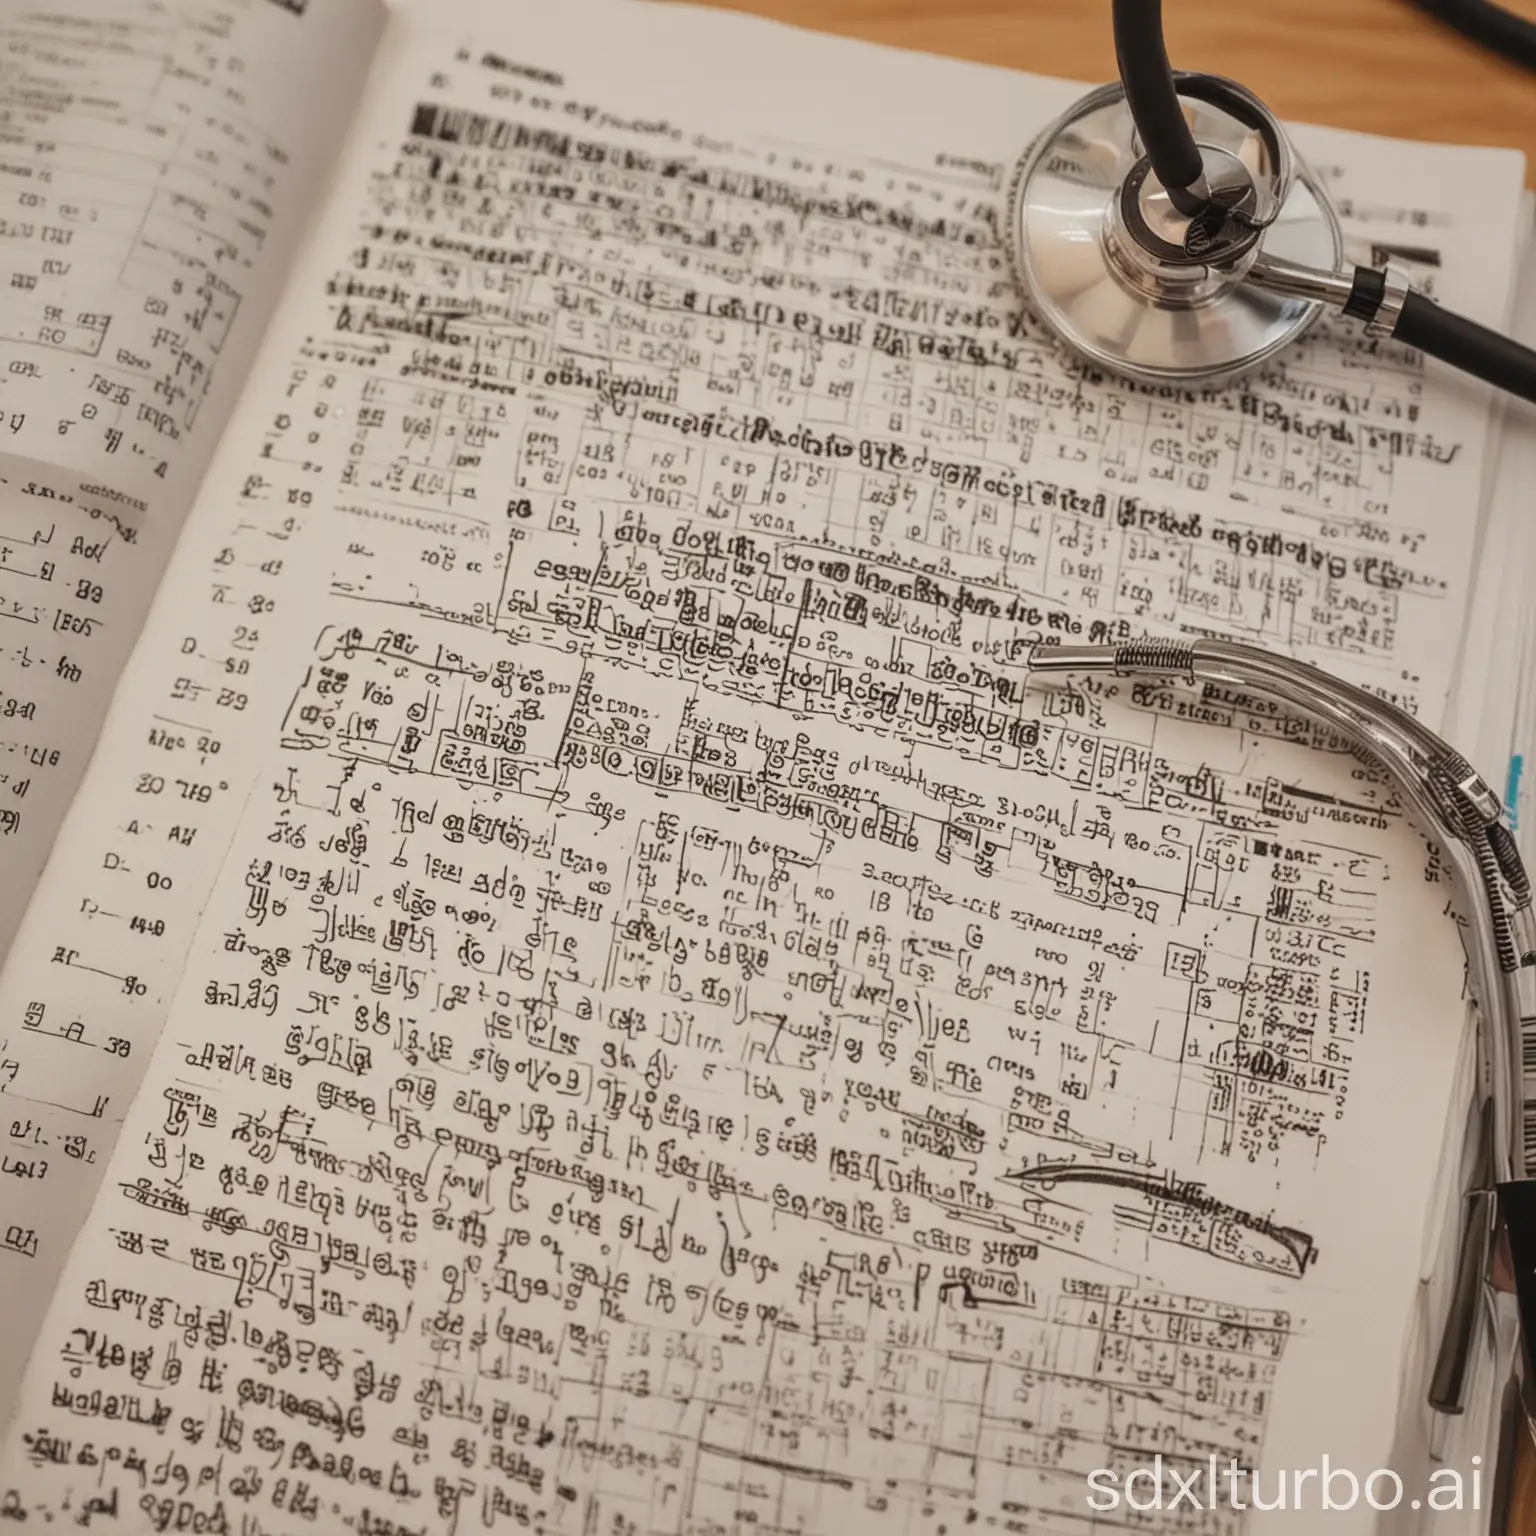 A close-up of a medical coding book with a stethoscope resting on top of it. The book is open to a page with a detailed illustration of a medical coding chart. The background is a blurred image of a classroom with students sitting at desks, listening to a lecture.